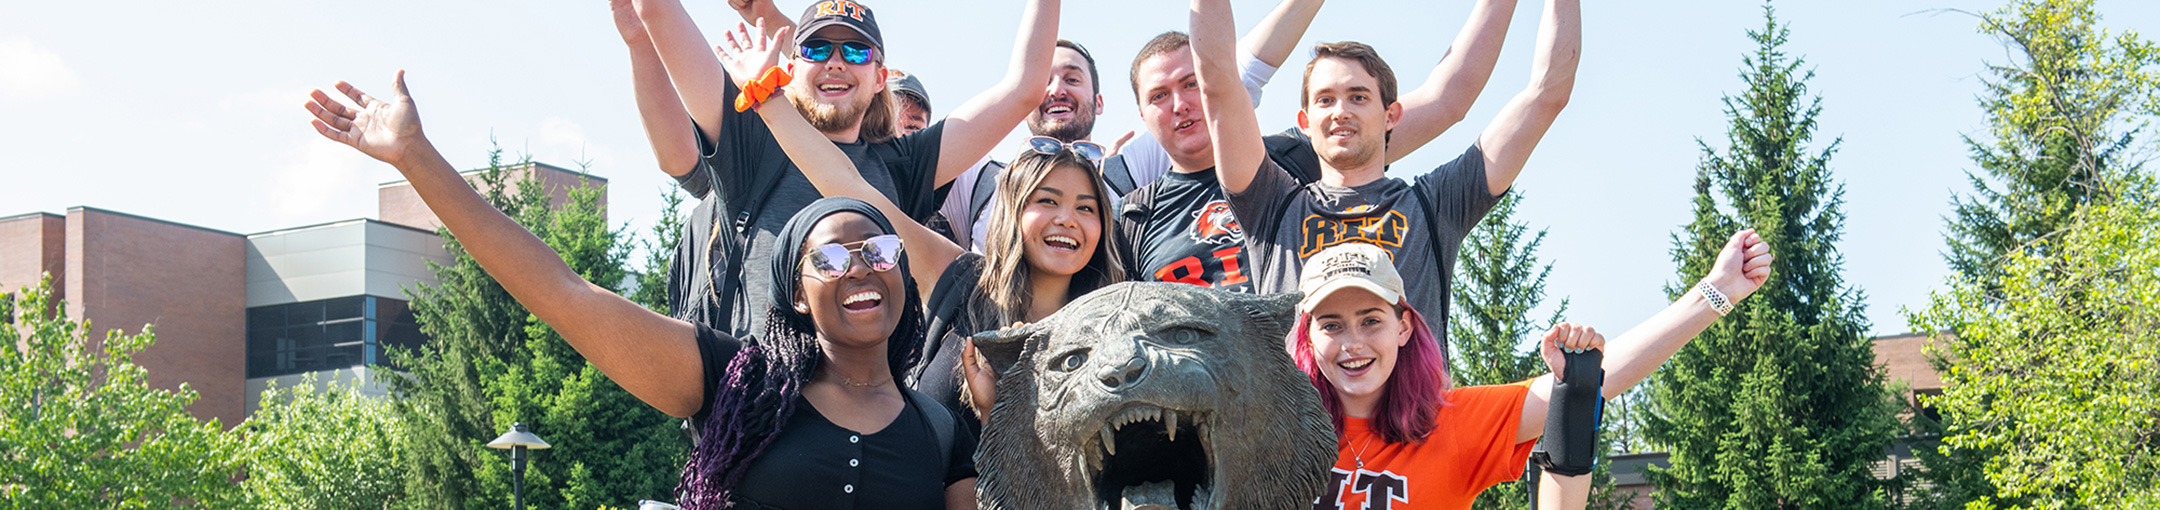 Students pose for a group photo with RIT tiger statue